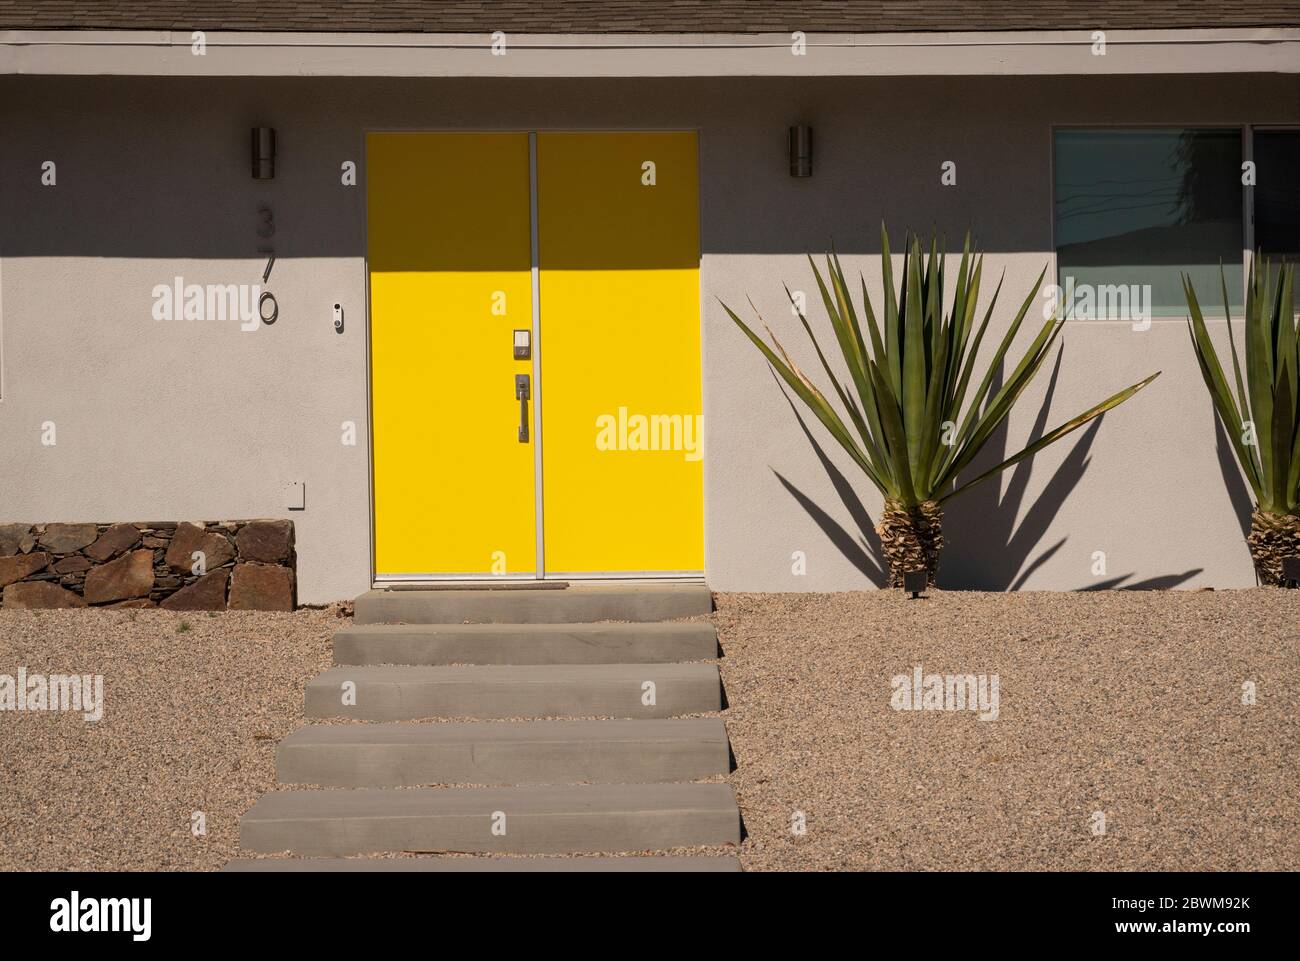 Mid Century Modern homes in Palm Springs CA Stock Photo